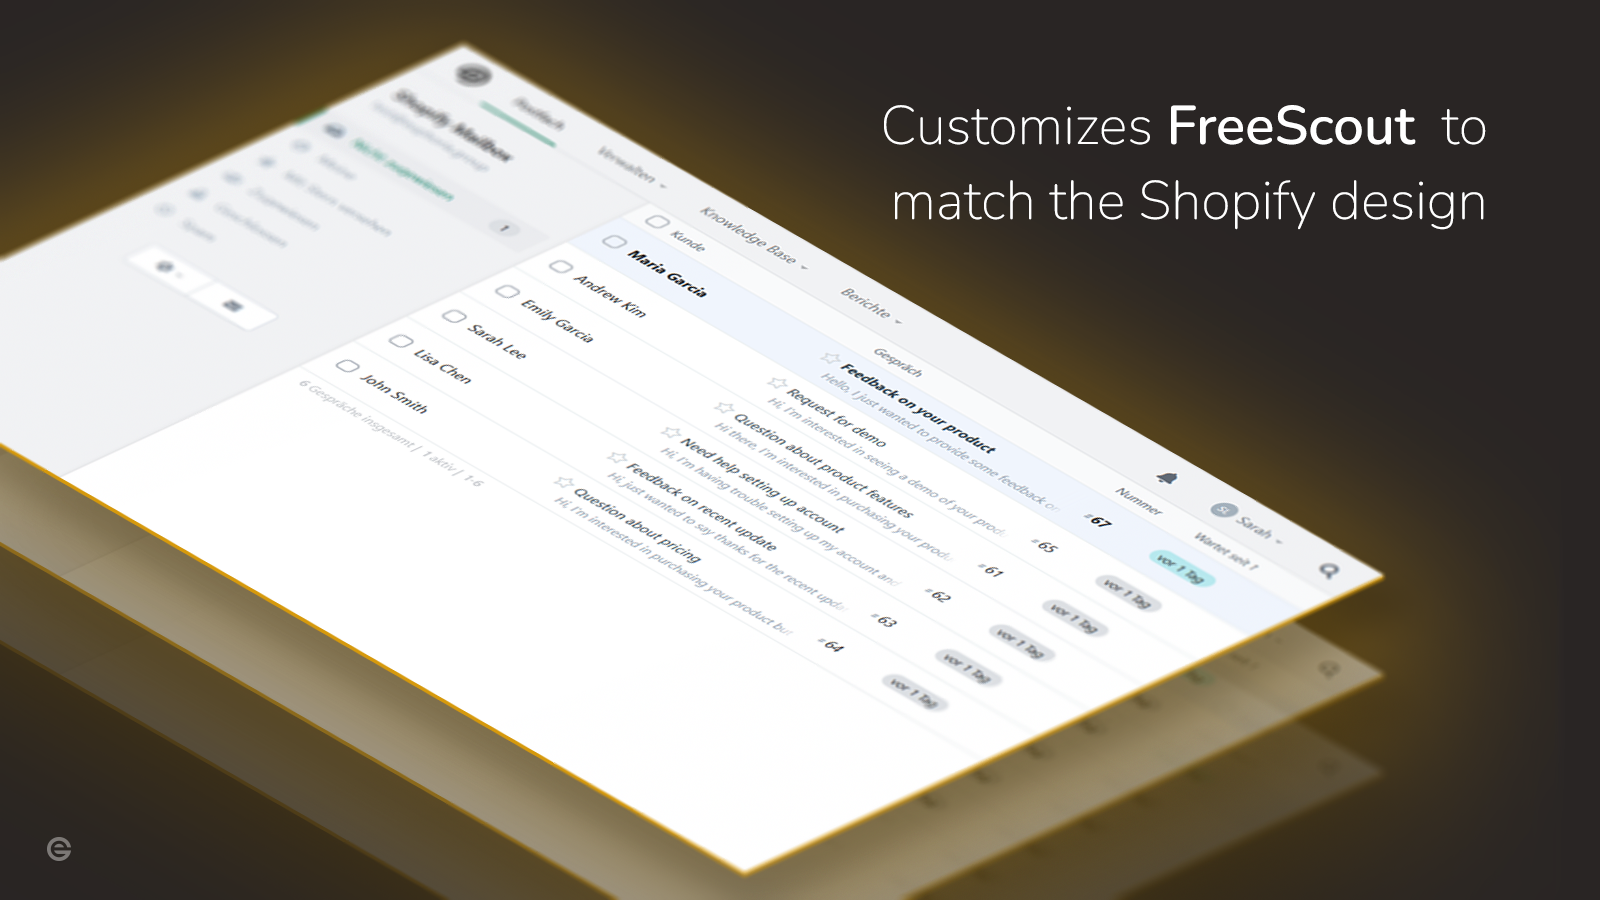 Customizes FreeScout to match the Shopify design